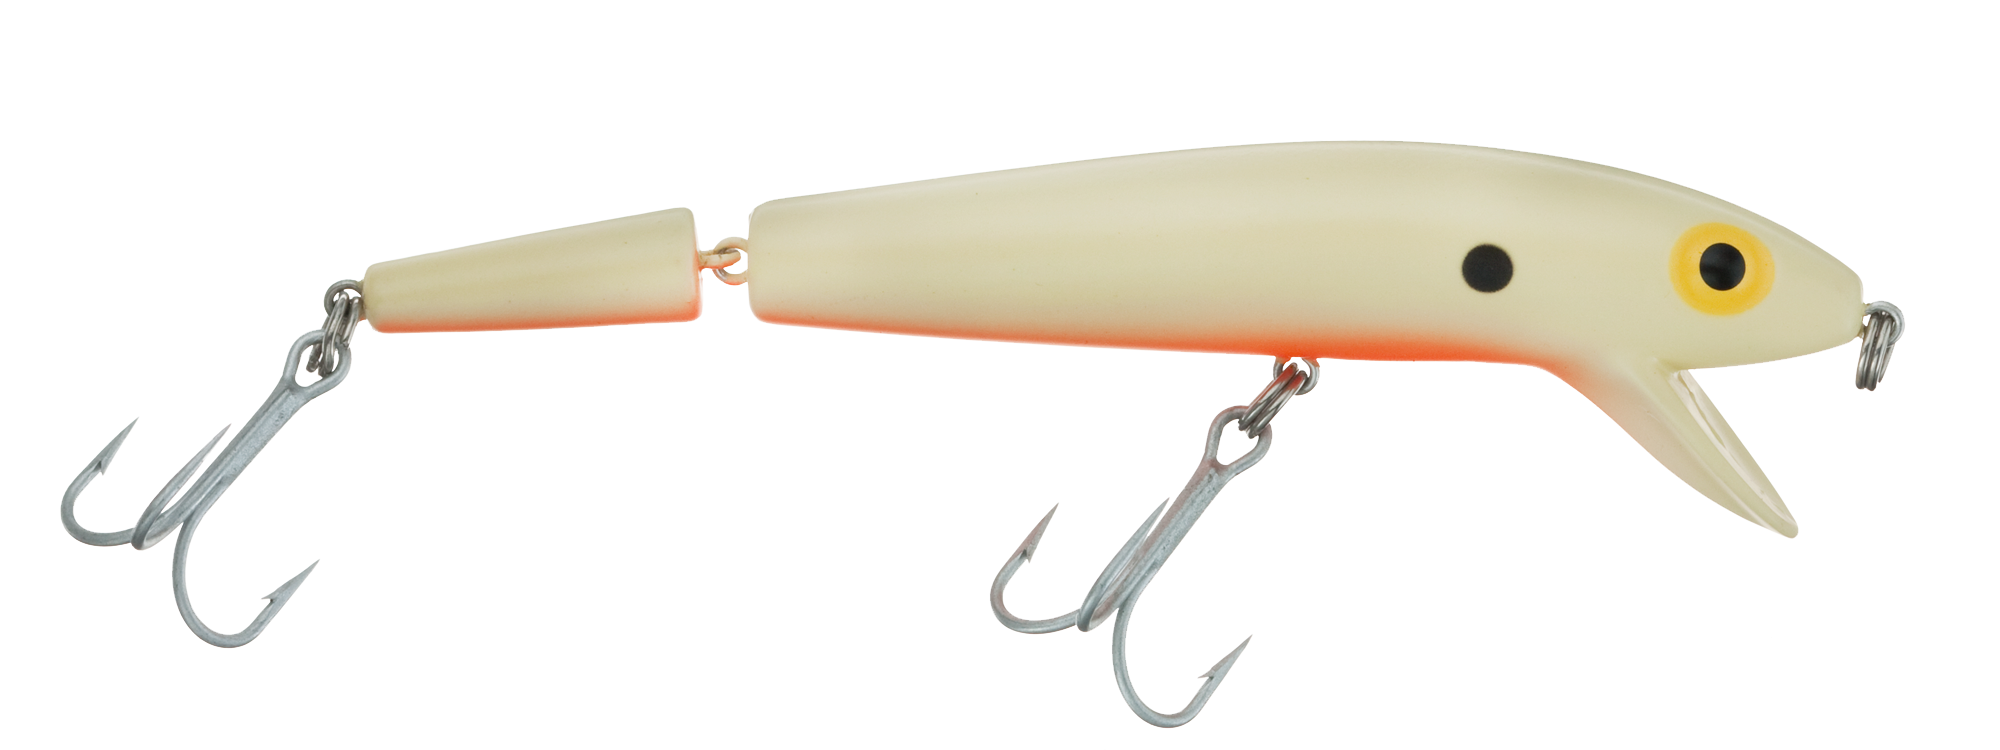 Storm Lures Original Jointed ThunderStick All colors available